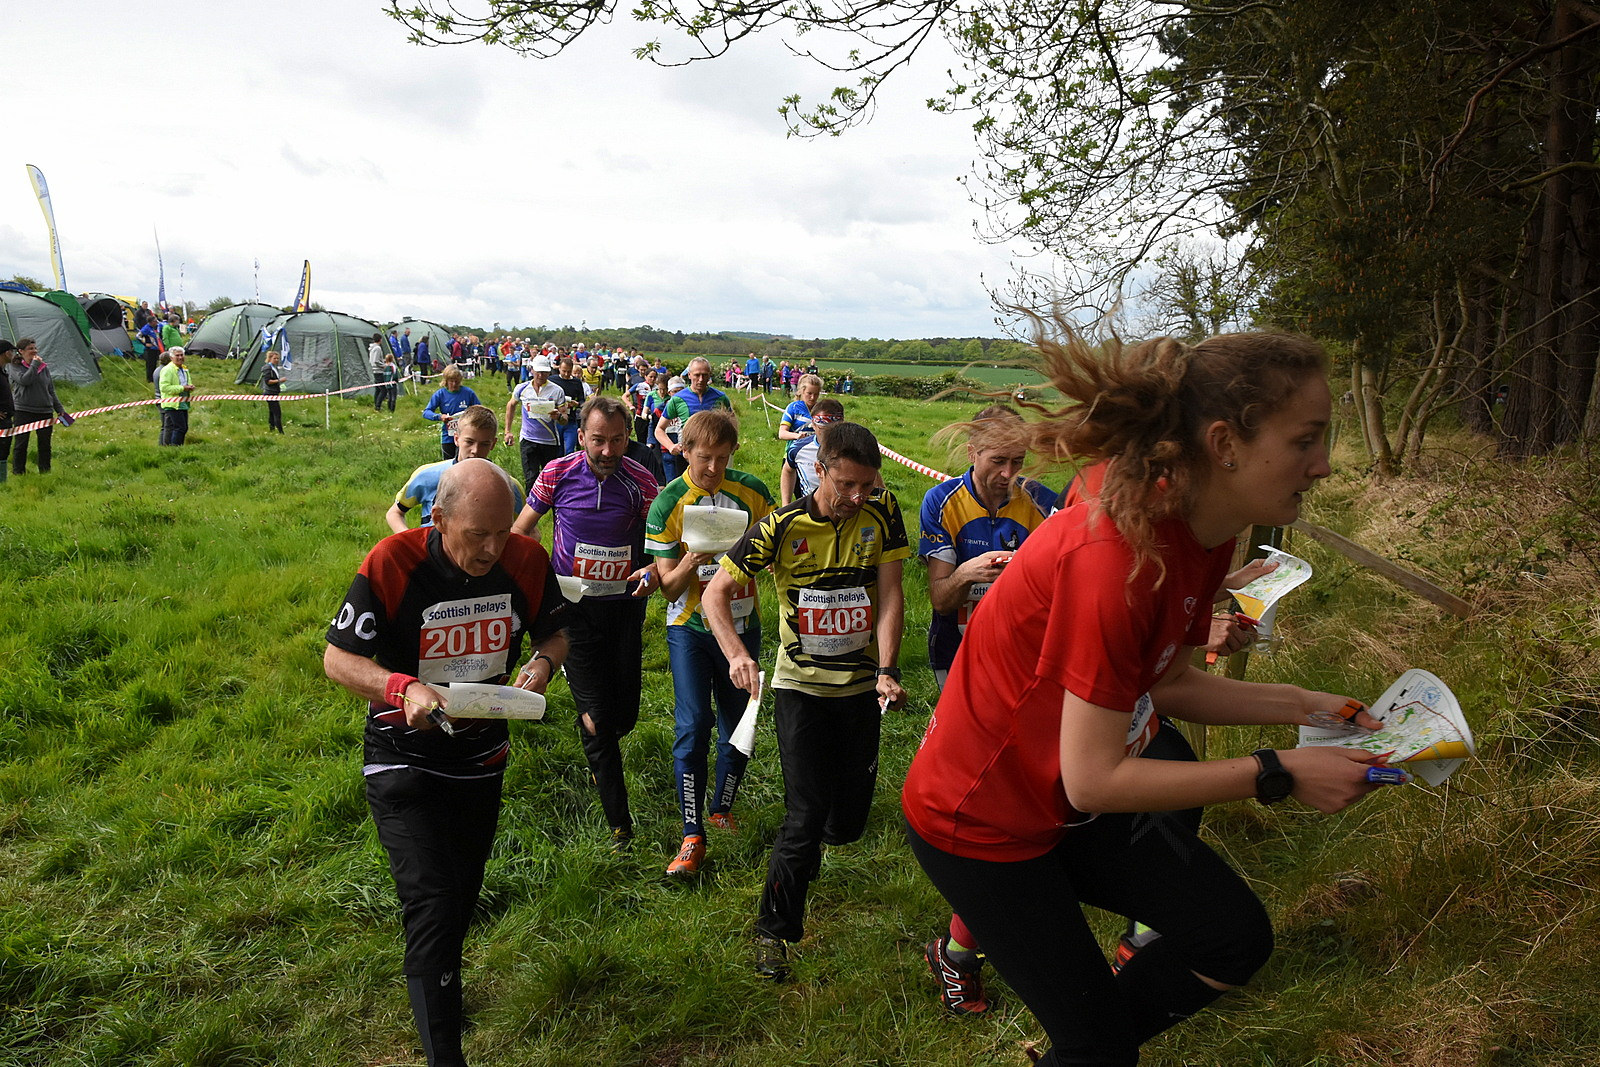 Championships are a main Scottish sports event for orienteers